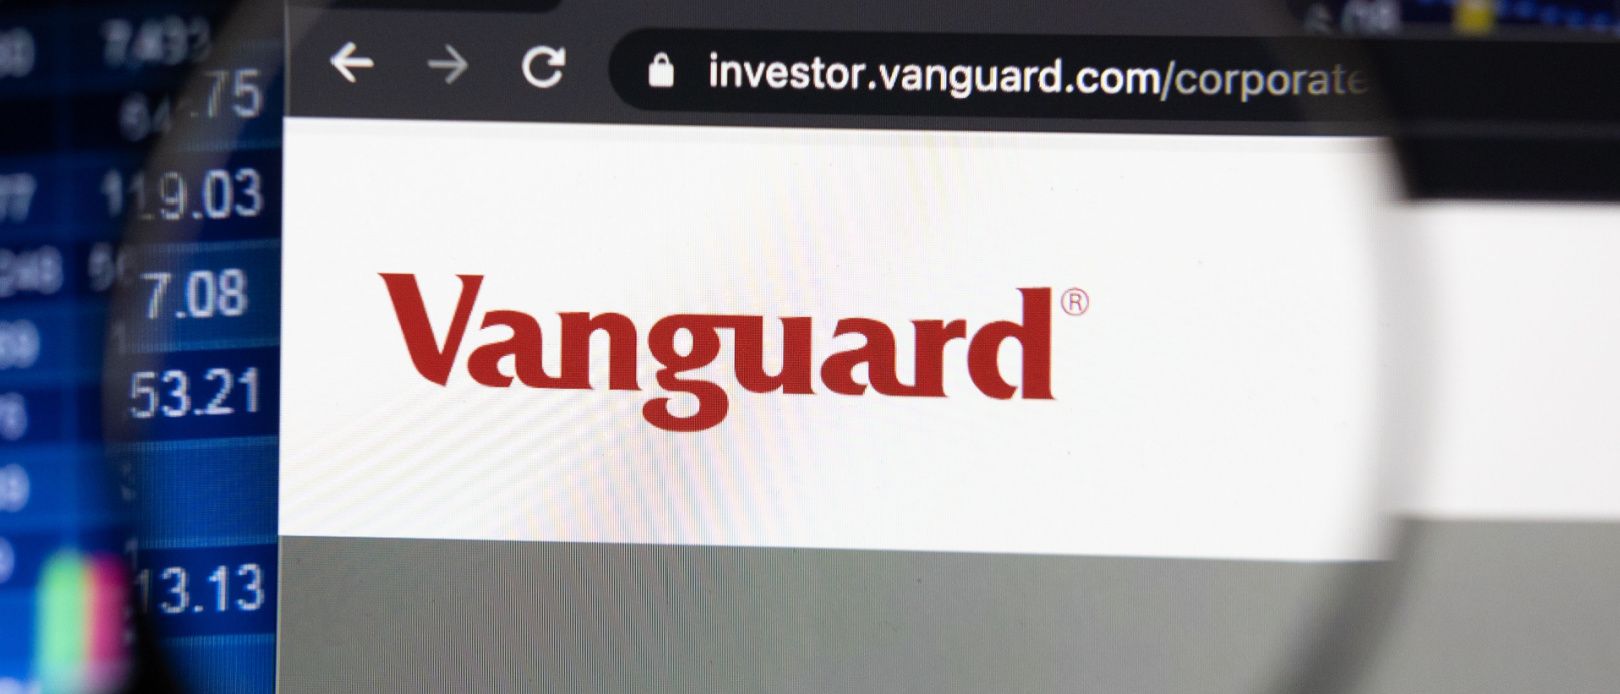 Vanguard company logo on a website with blurry stock market developments in the background